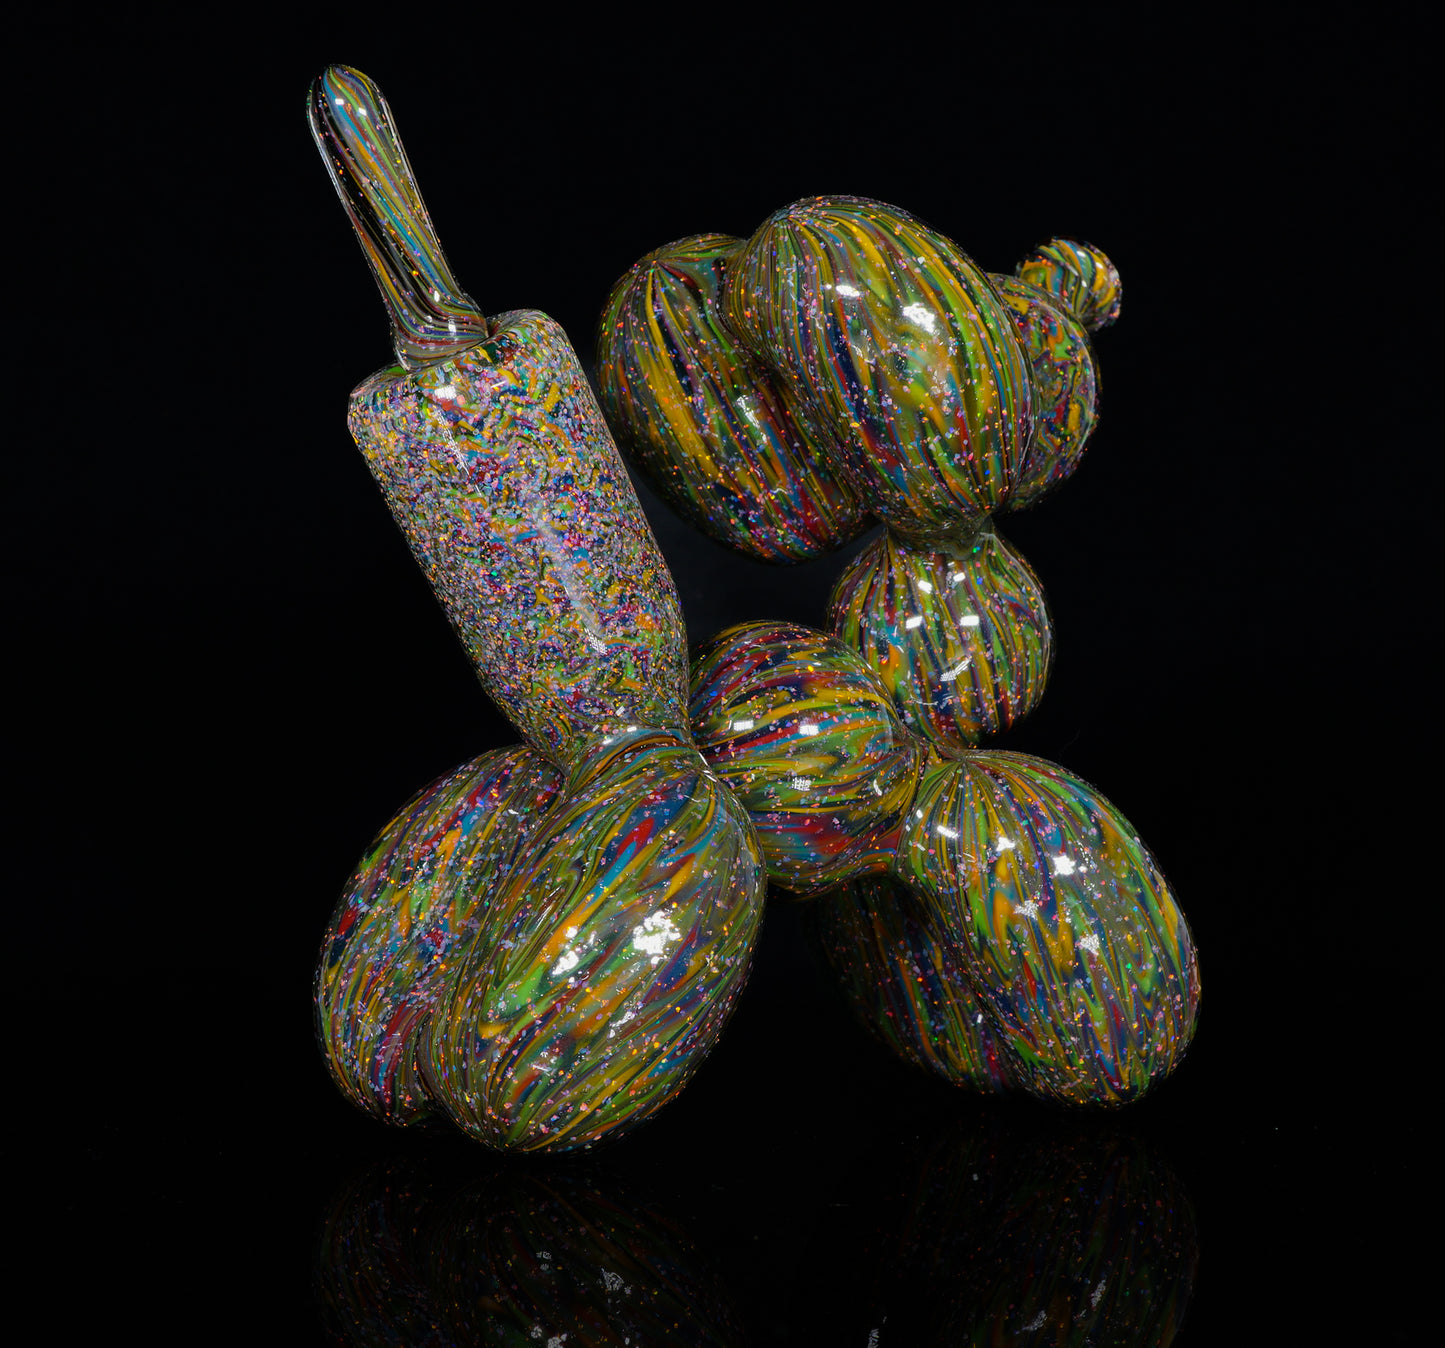 Crushed Opal UV 10 Strip Tech Balloon Dog + Removable Tail